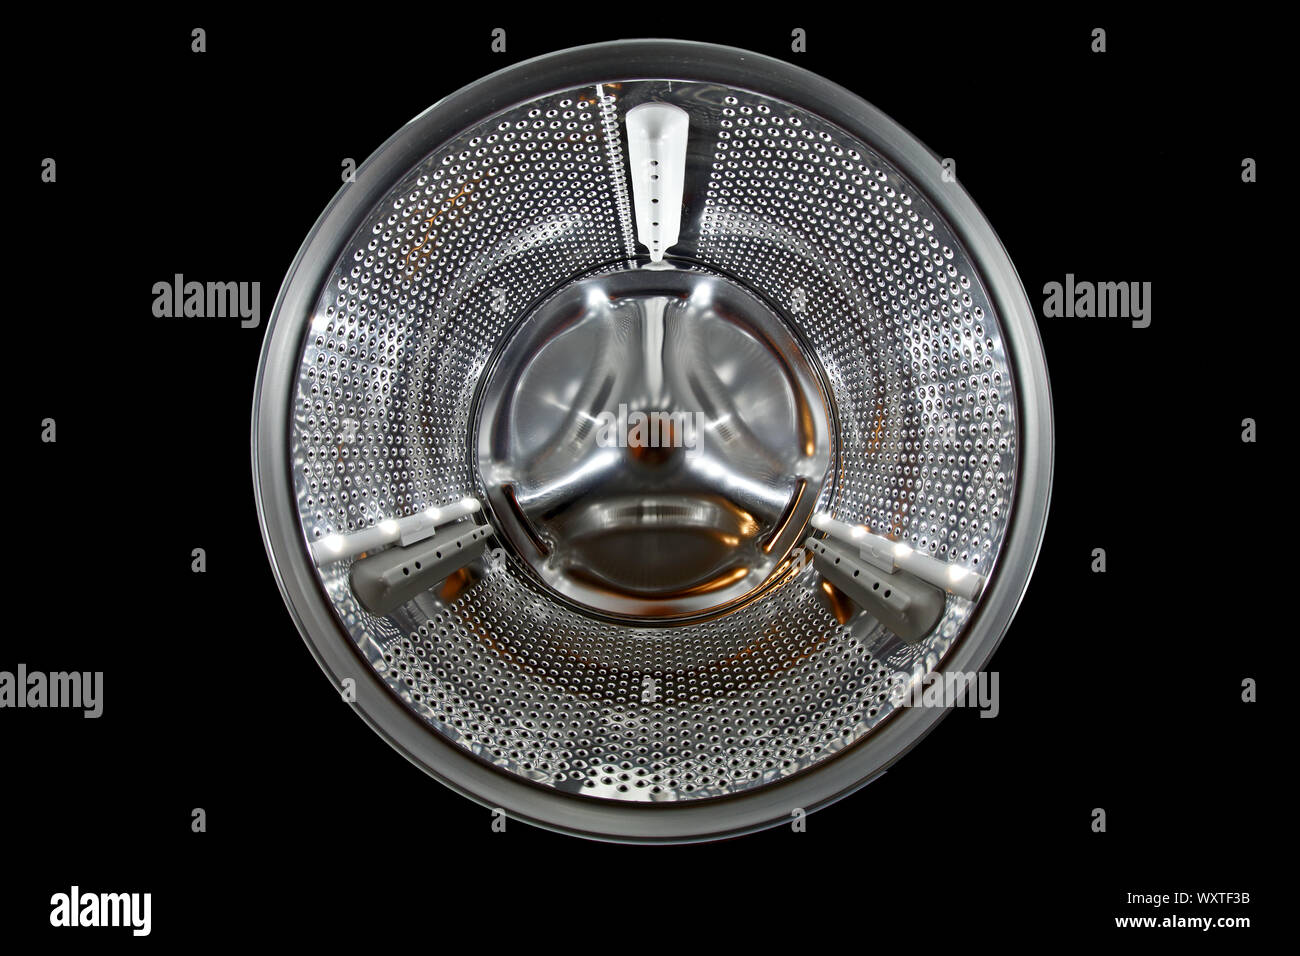 Washer Drum Stock Photos & Washer Drum Stock Images - Alamy